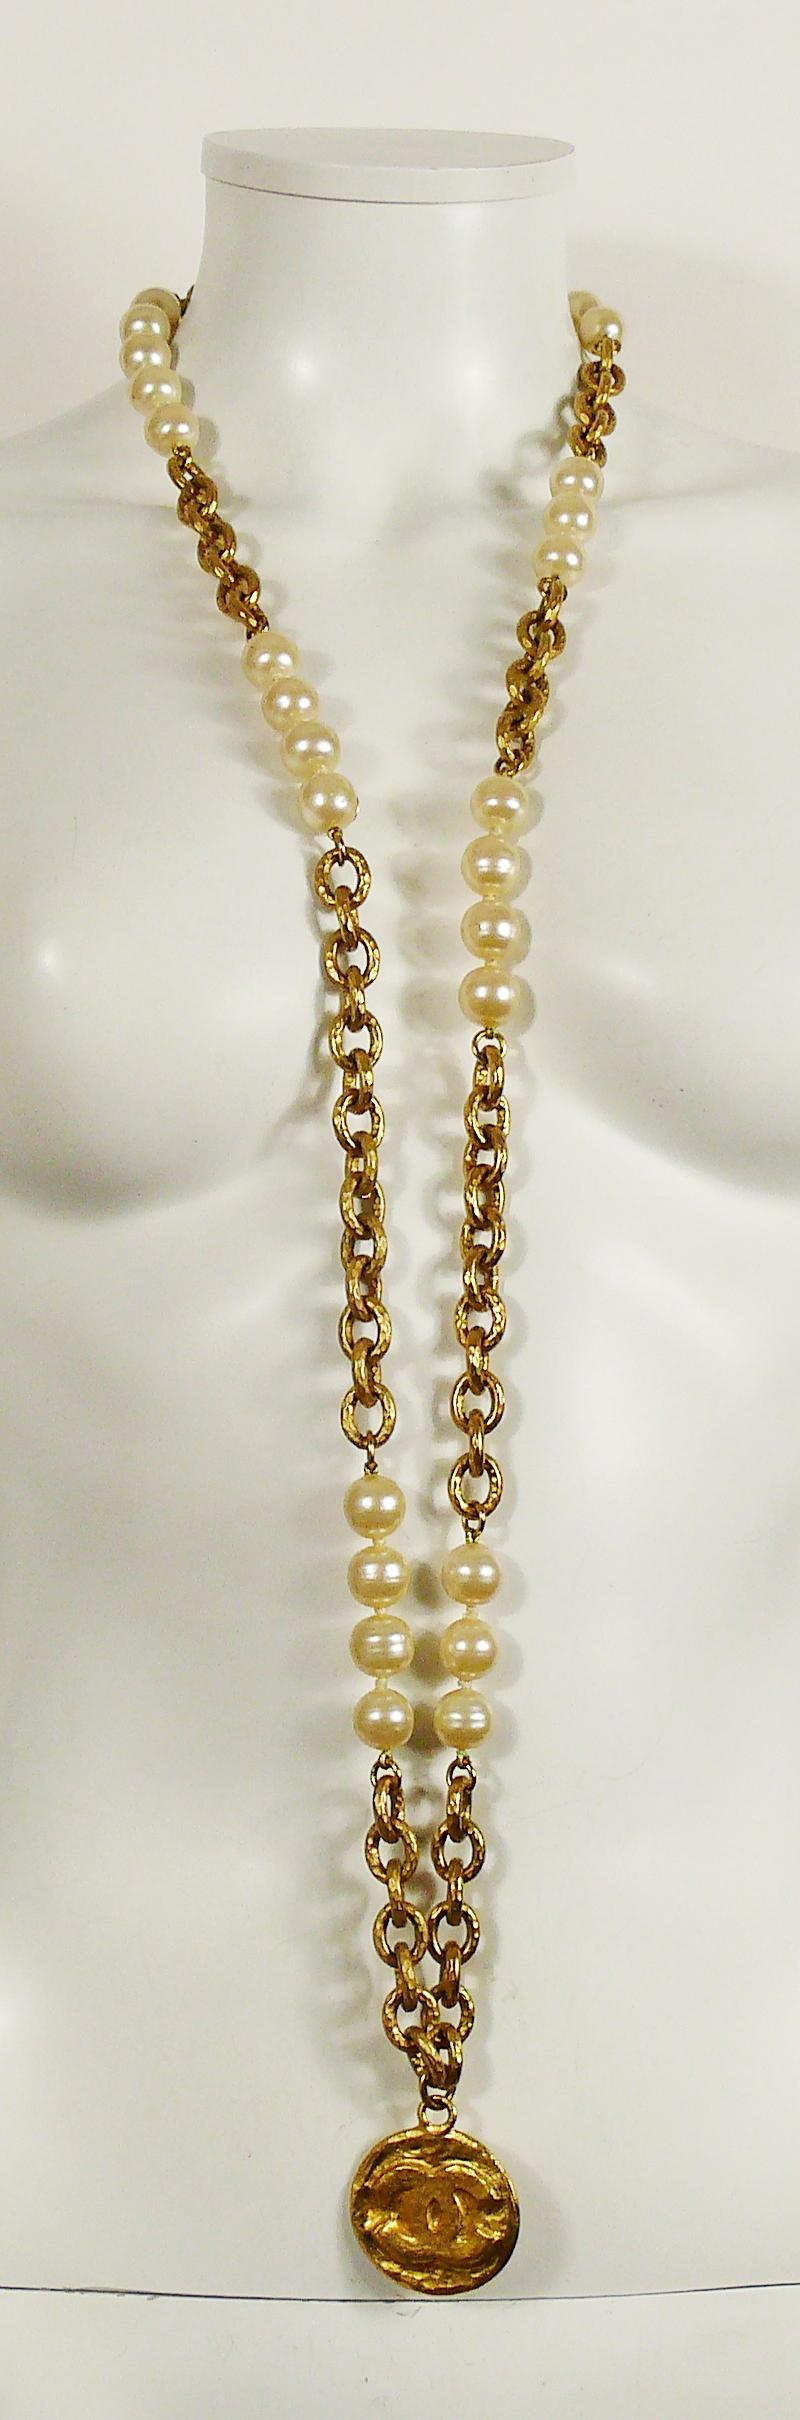 CHANEL vintage gold toned long chain necklace featuring chunky hammered oval links alterning with large glass faux pearls, textured CC logo medallion pendant.

From the Fall/Winter 1993 Collection.

Could be used as a long single strand necklace or